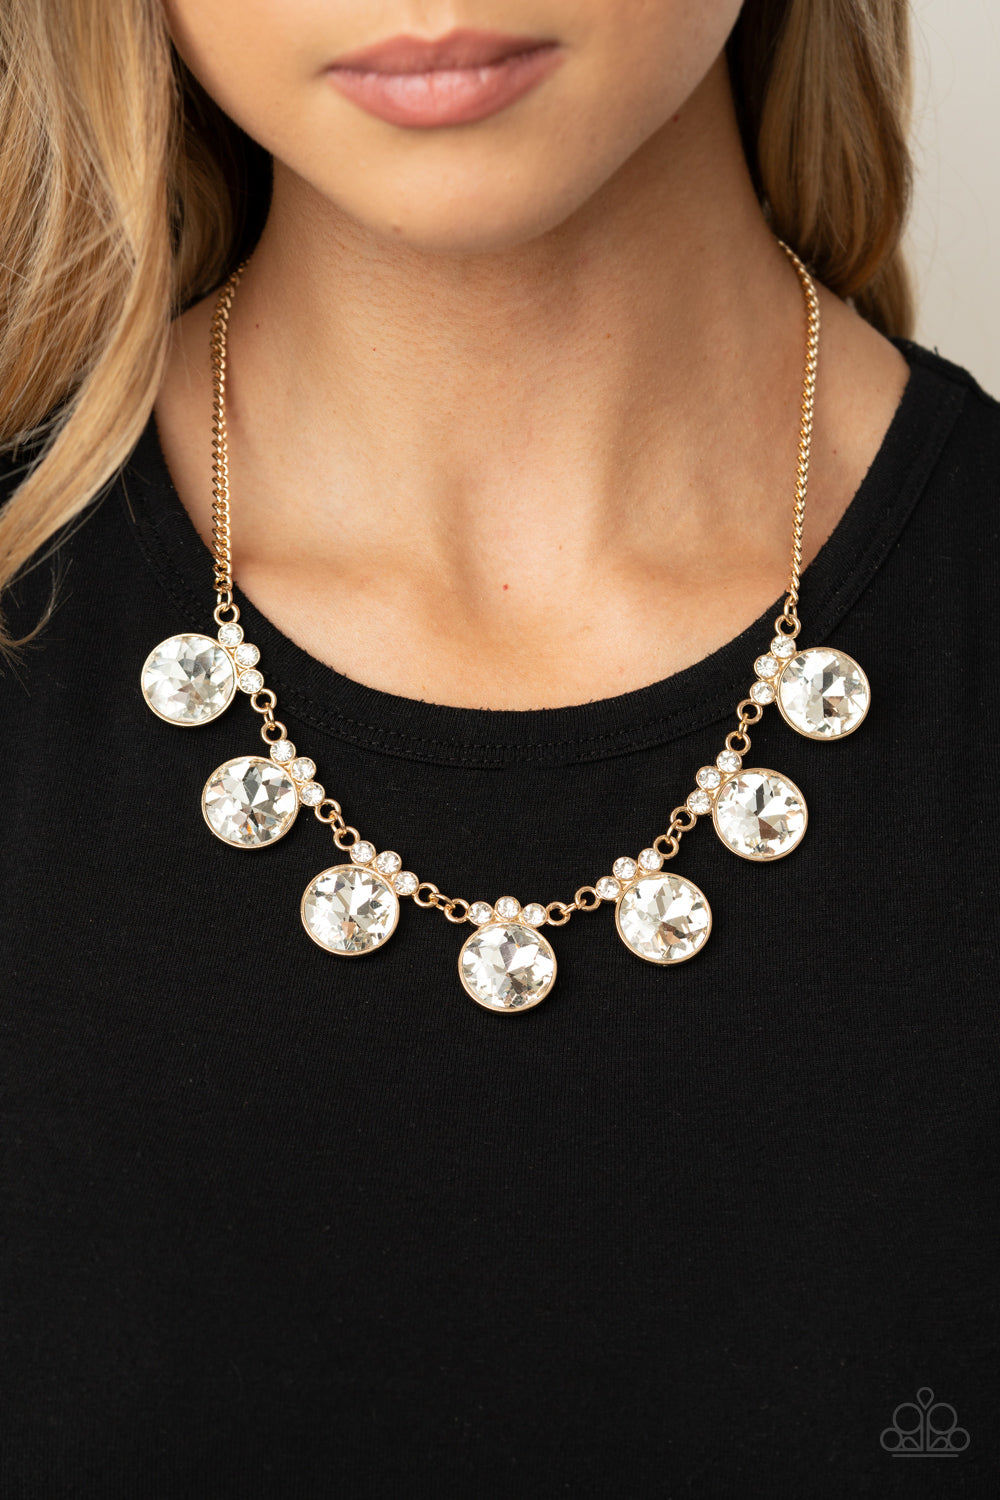 GLOW-Getter Glamour Necklace (Gold, White)